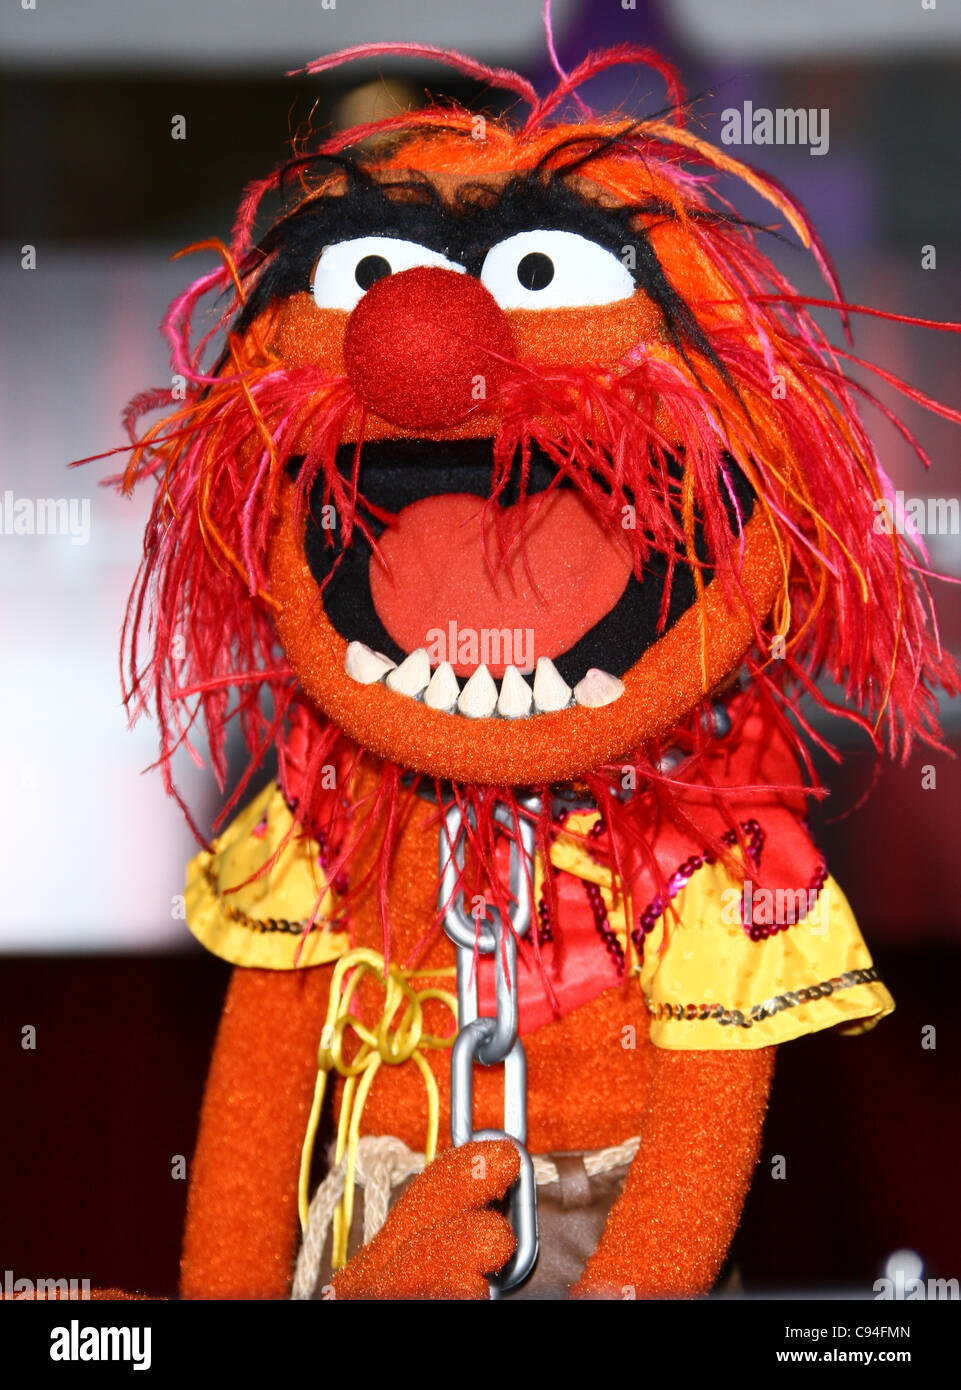 Muppet Animal Images